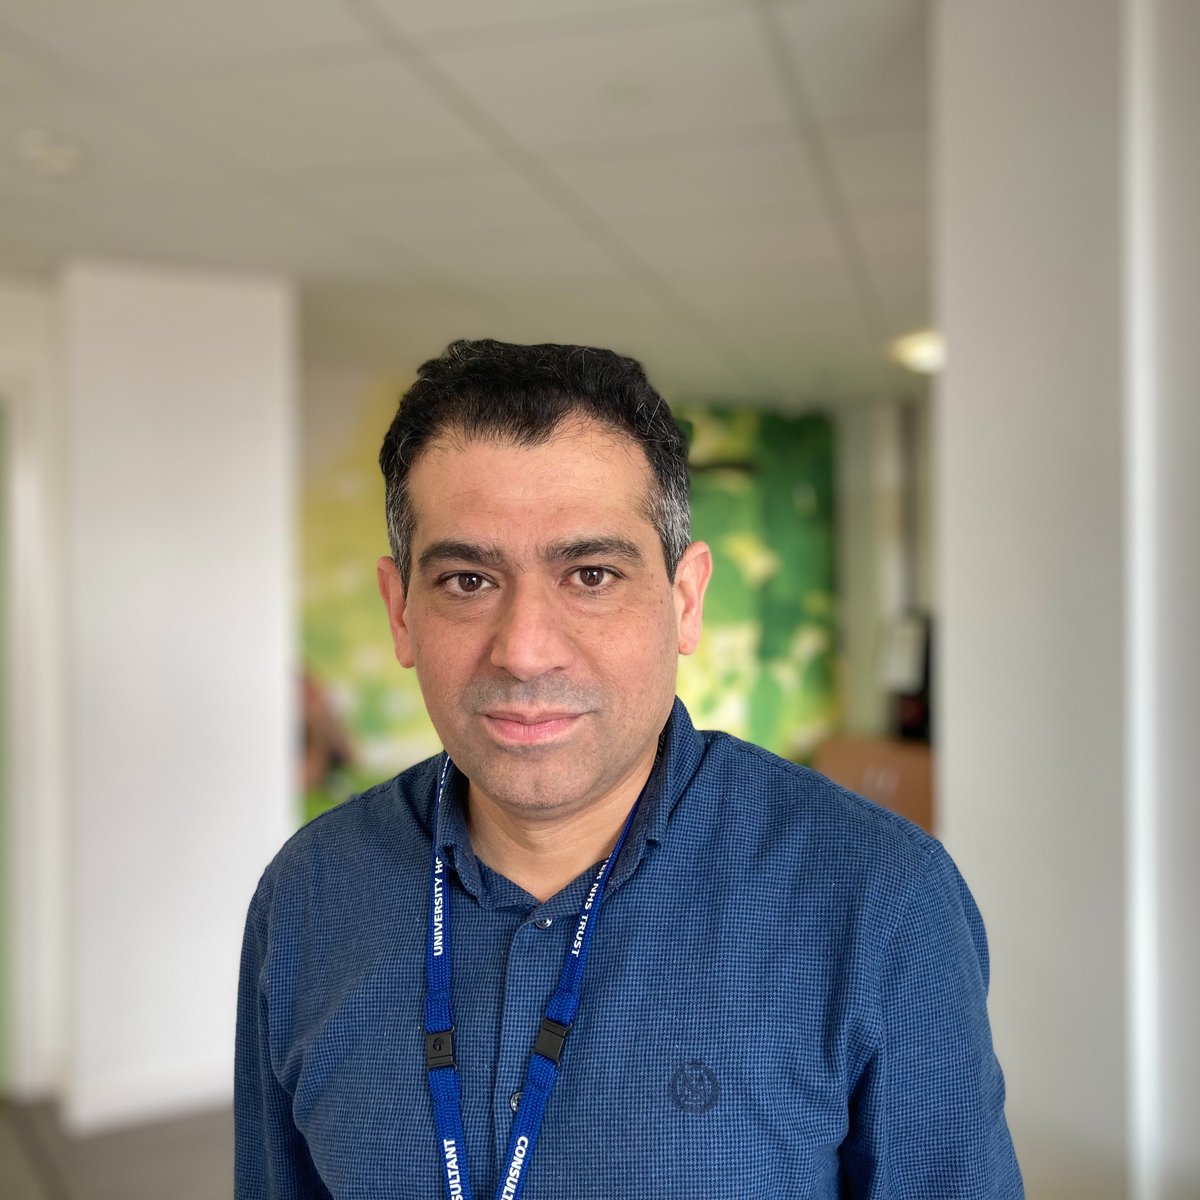 Tune in to Ramadan Radio (87.7 FM) at 7pm this evening to hear Diabetes Consultant, @EHTASHAMAHMAD13 talk to Cllr @Zuffar_Haq about #diabetes. For more information about what we do here at the Leicester Diabetes Centre, visit our website: leicesterdiabetescentre.org.uk